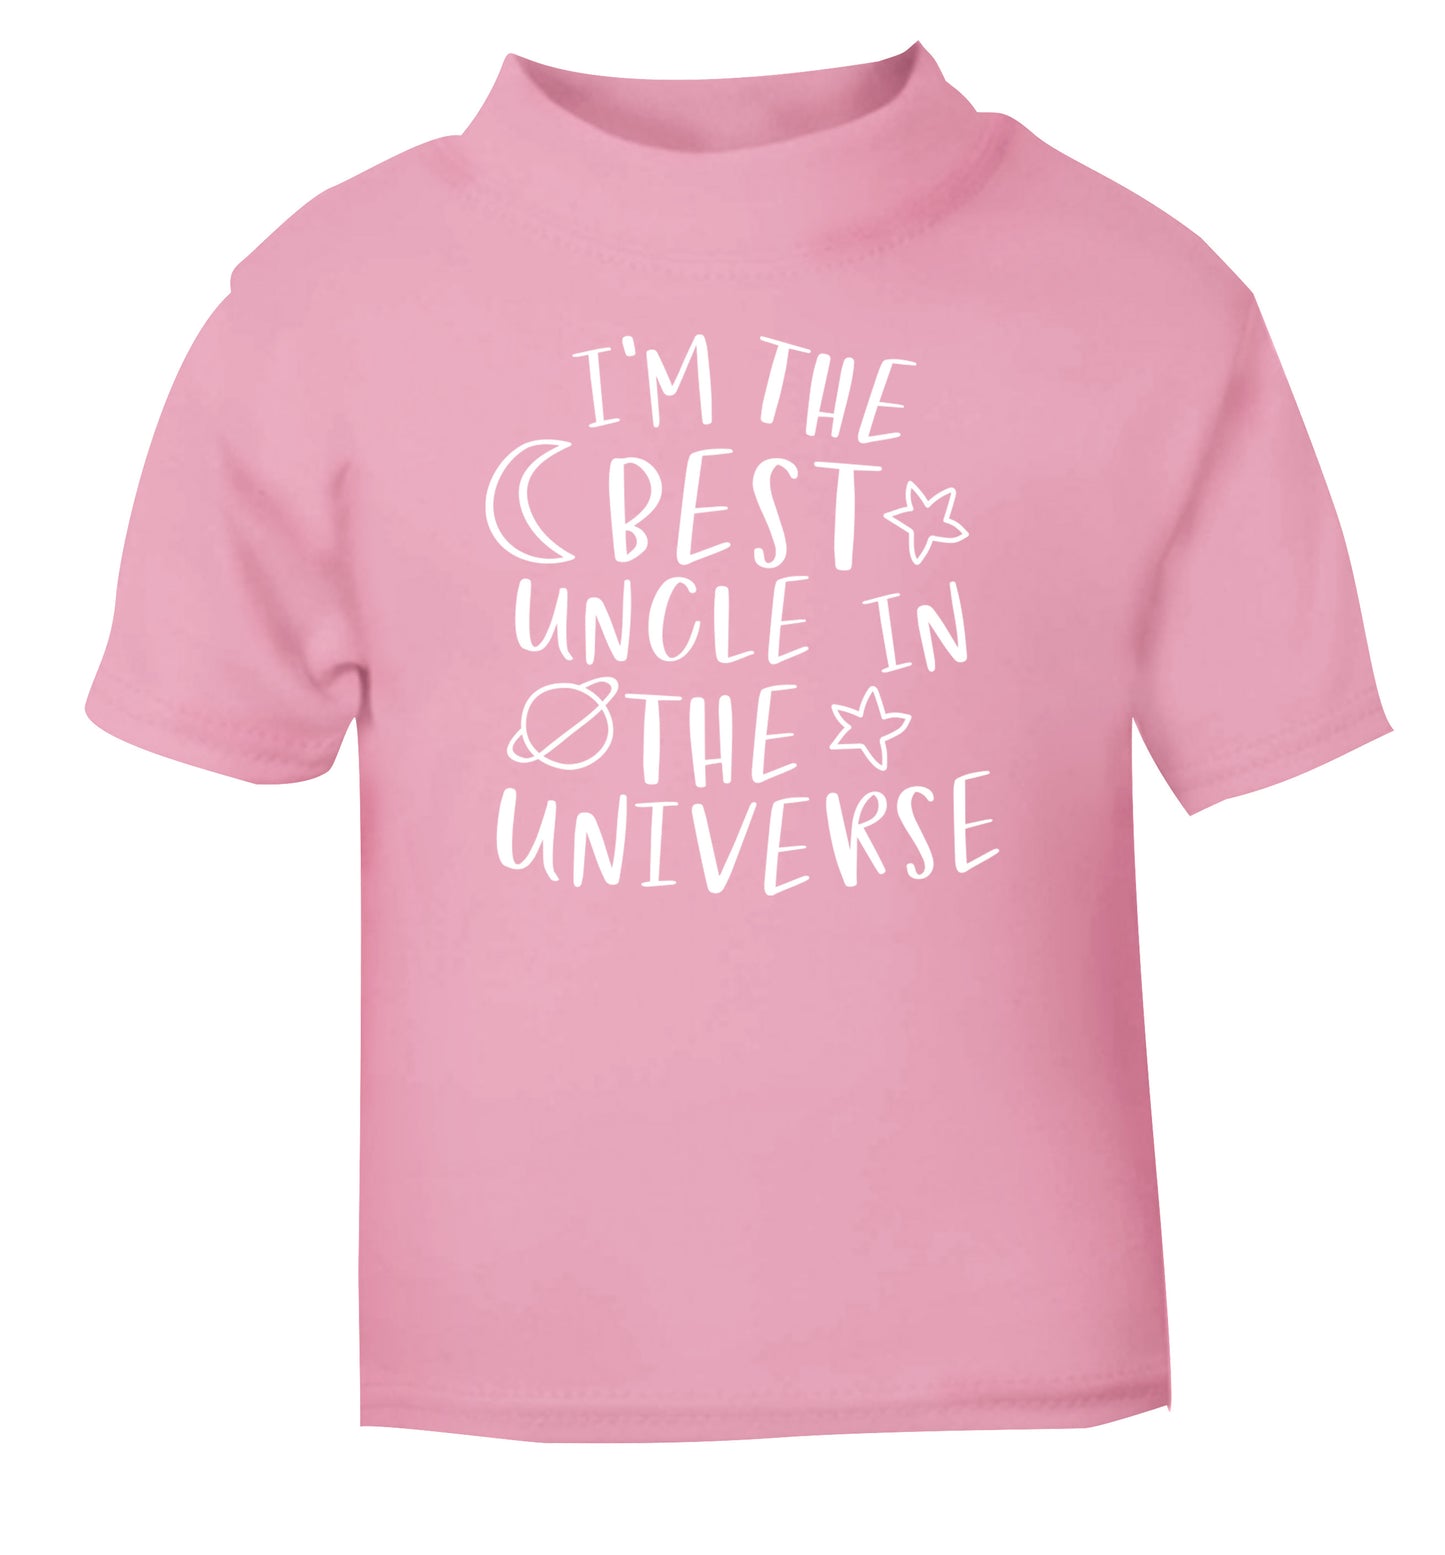 I'm the best uncle in the universe light pink Baby Toddler Tshirt 2 Years